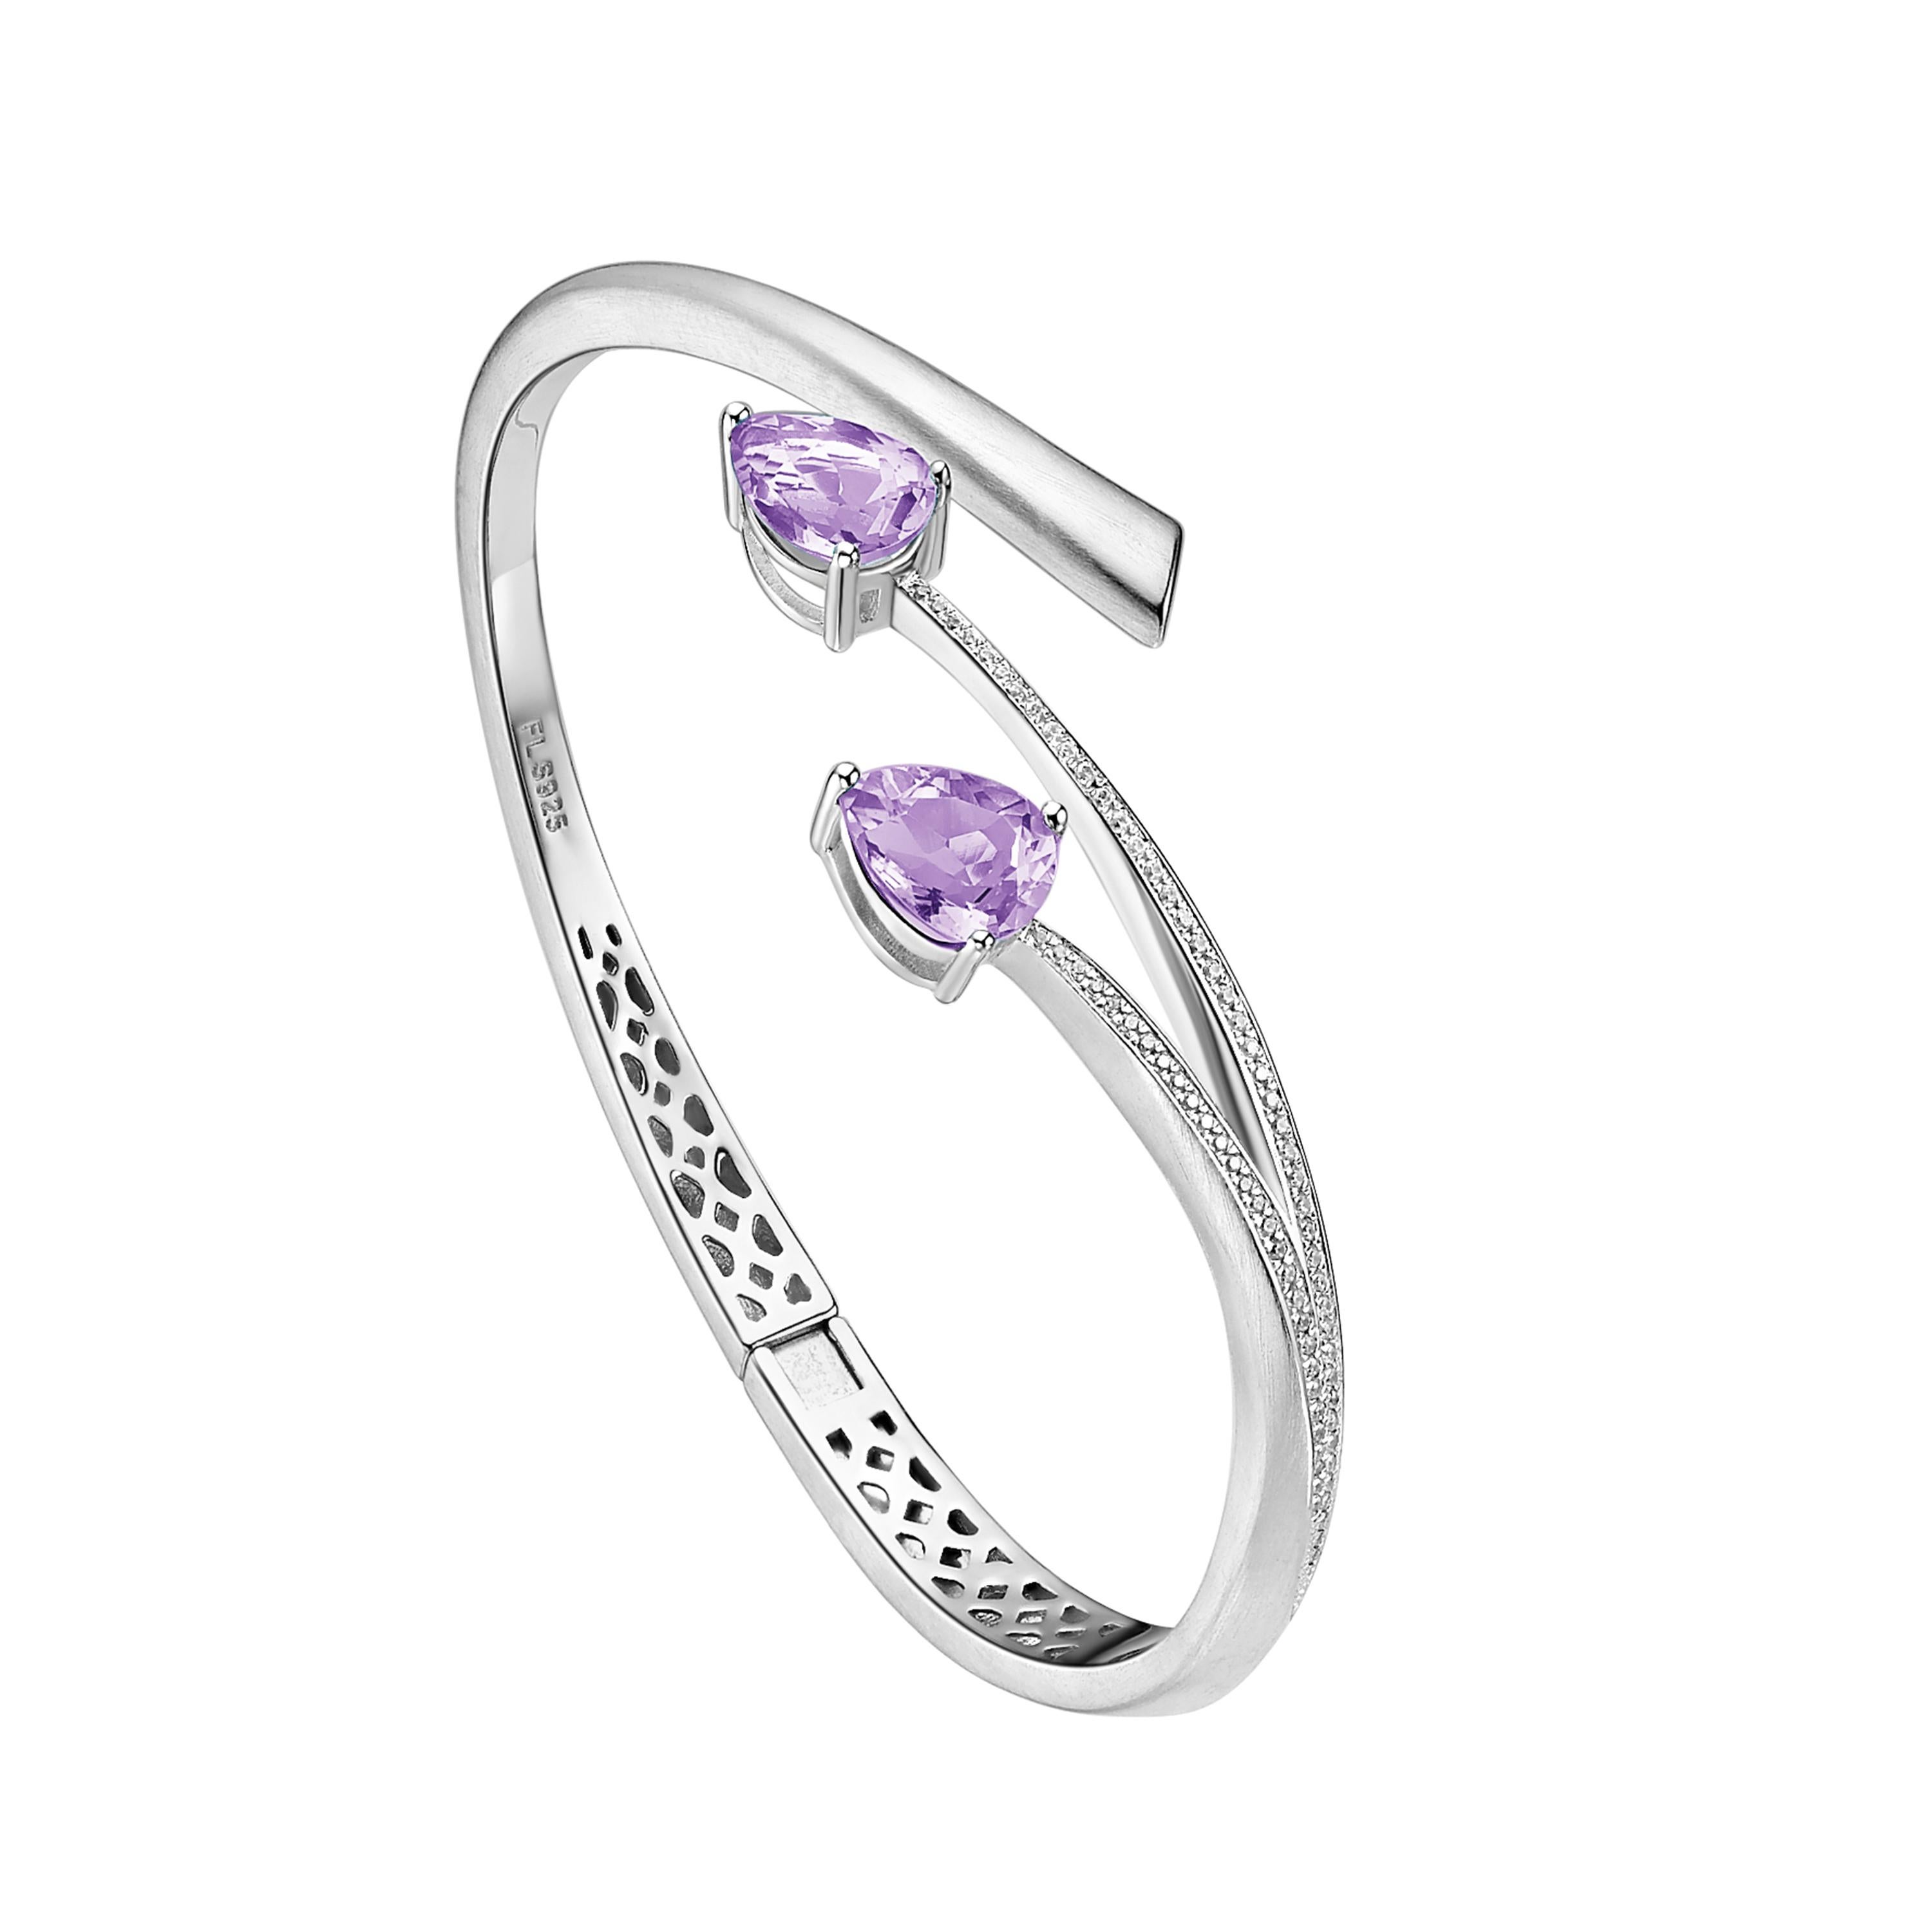 Description:
Shooting Star bangle with pear cut purple amethyst and Hearts and Arrows* white cubic zirconia, set in matte polished white rhodium plate on sterling silver.

Inner diameter (LxW): small/medium = 56mm x 60 mm, large = 60mm x